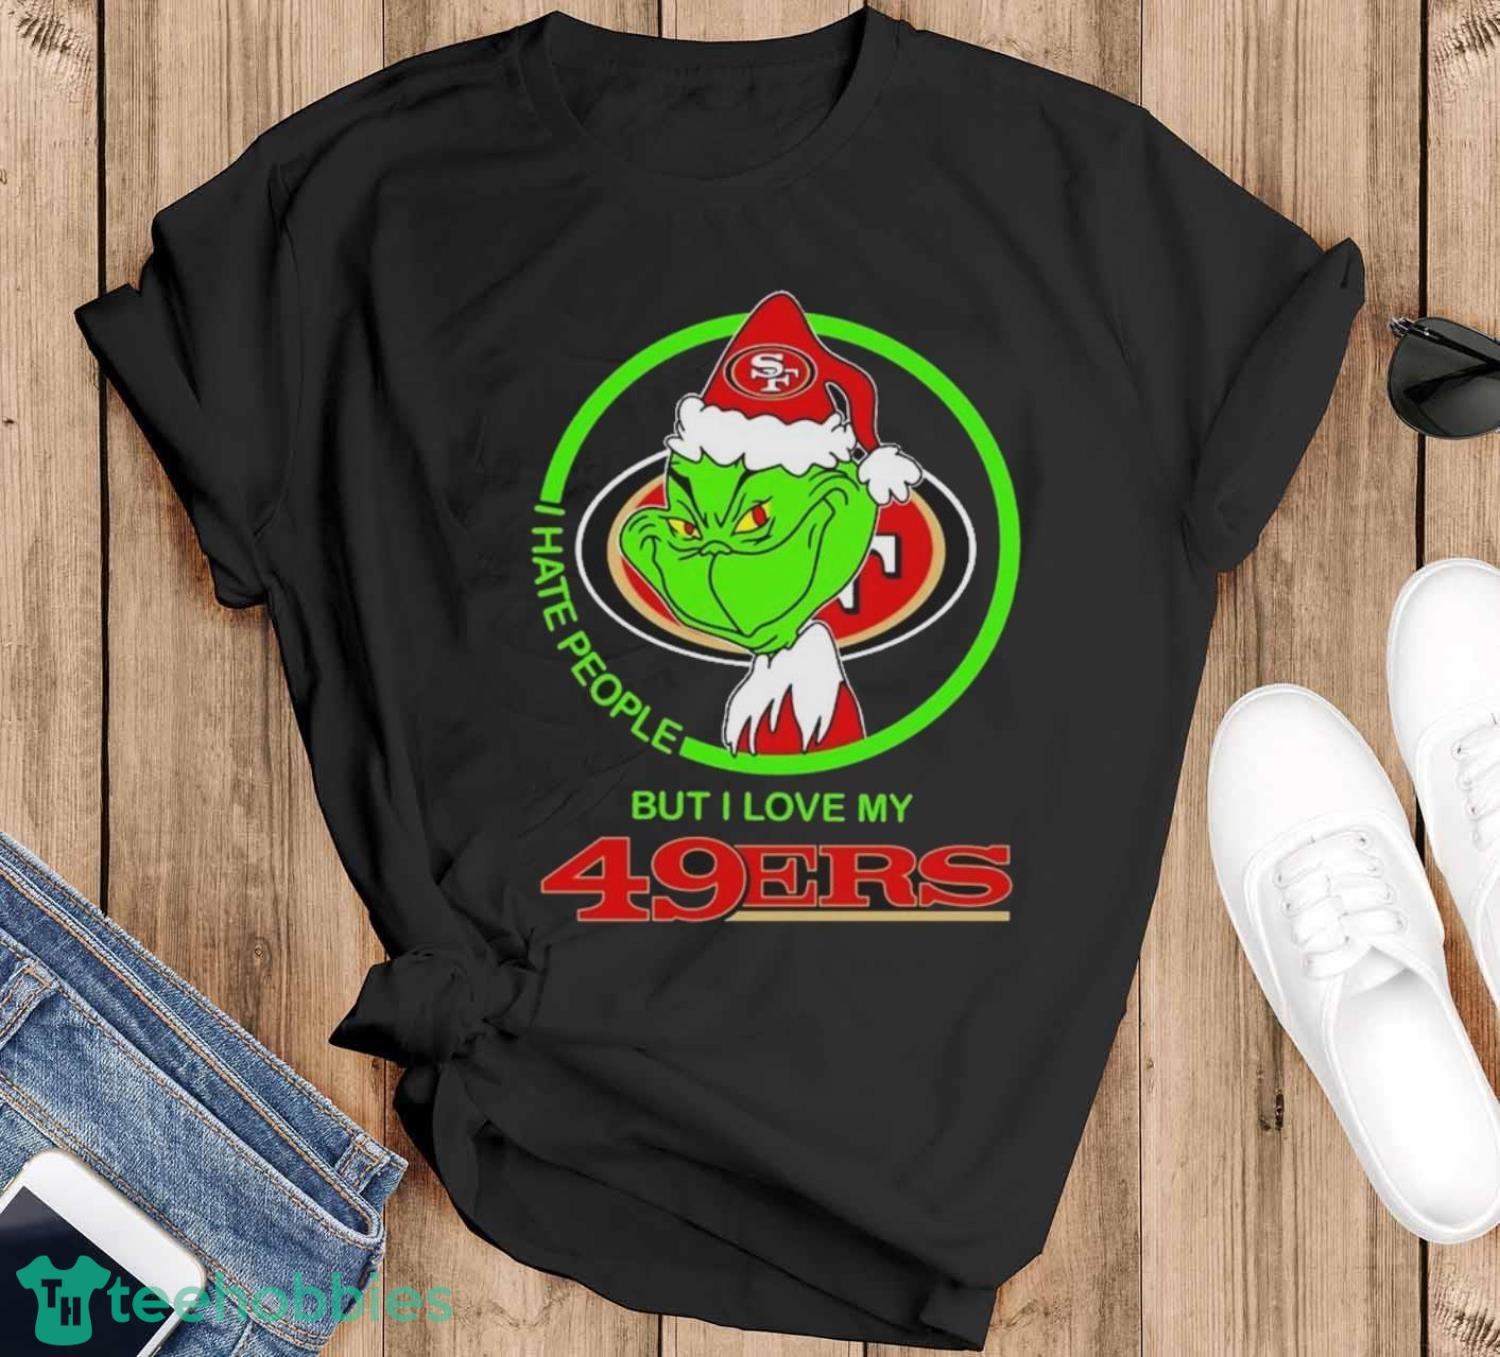 Grinch Christmas I Hate People But I Love My 49ers Shirt - Black T-Shirt